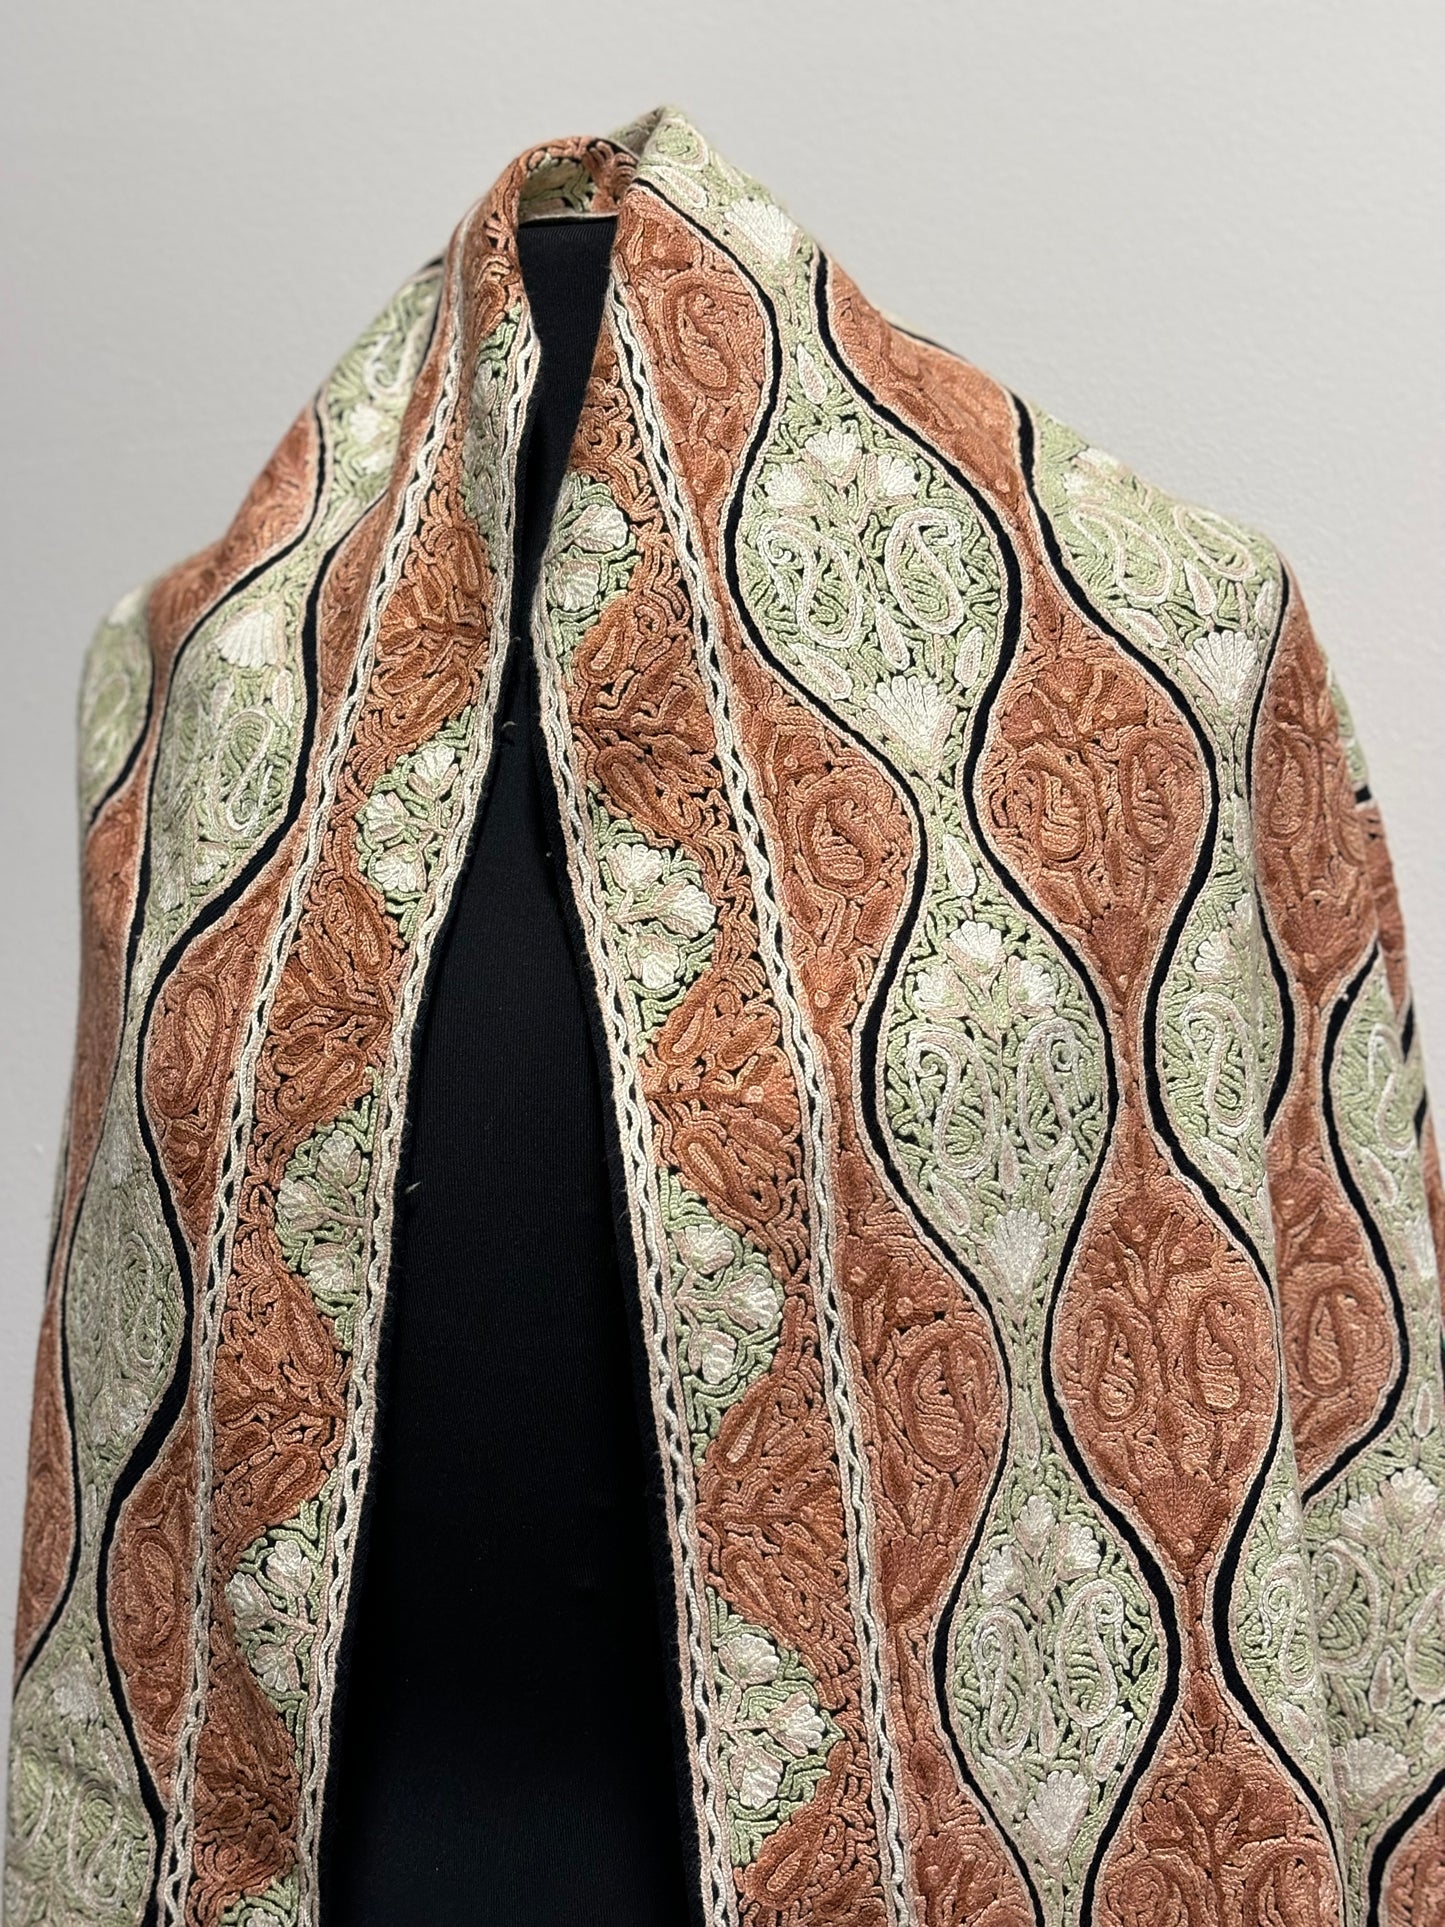 Shawl- Black color Woolen shawl with Light Green, Brown and White Aari embroidery